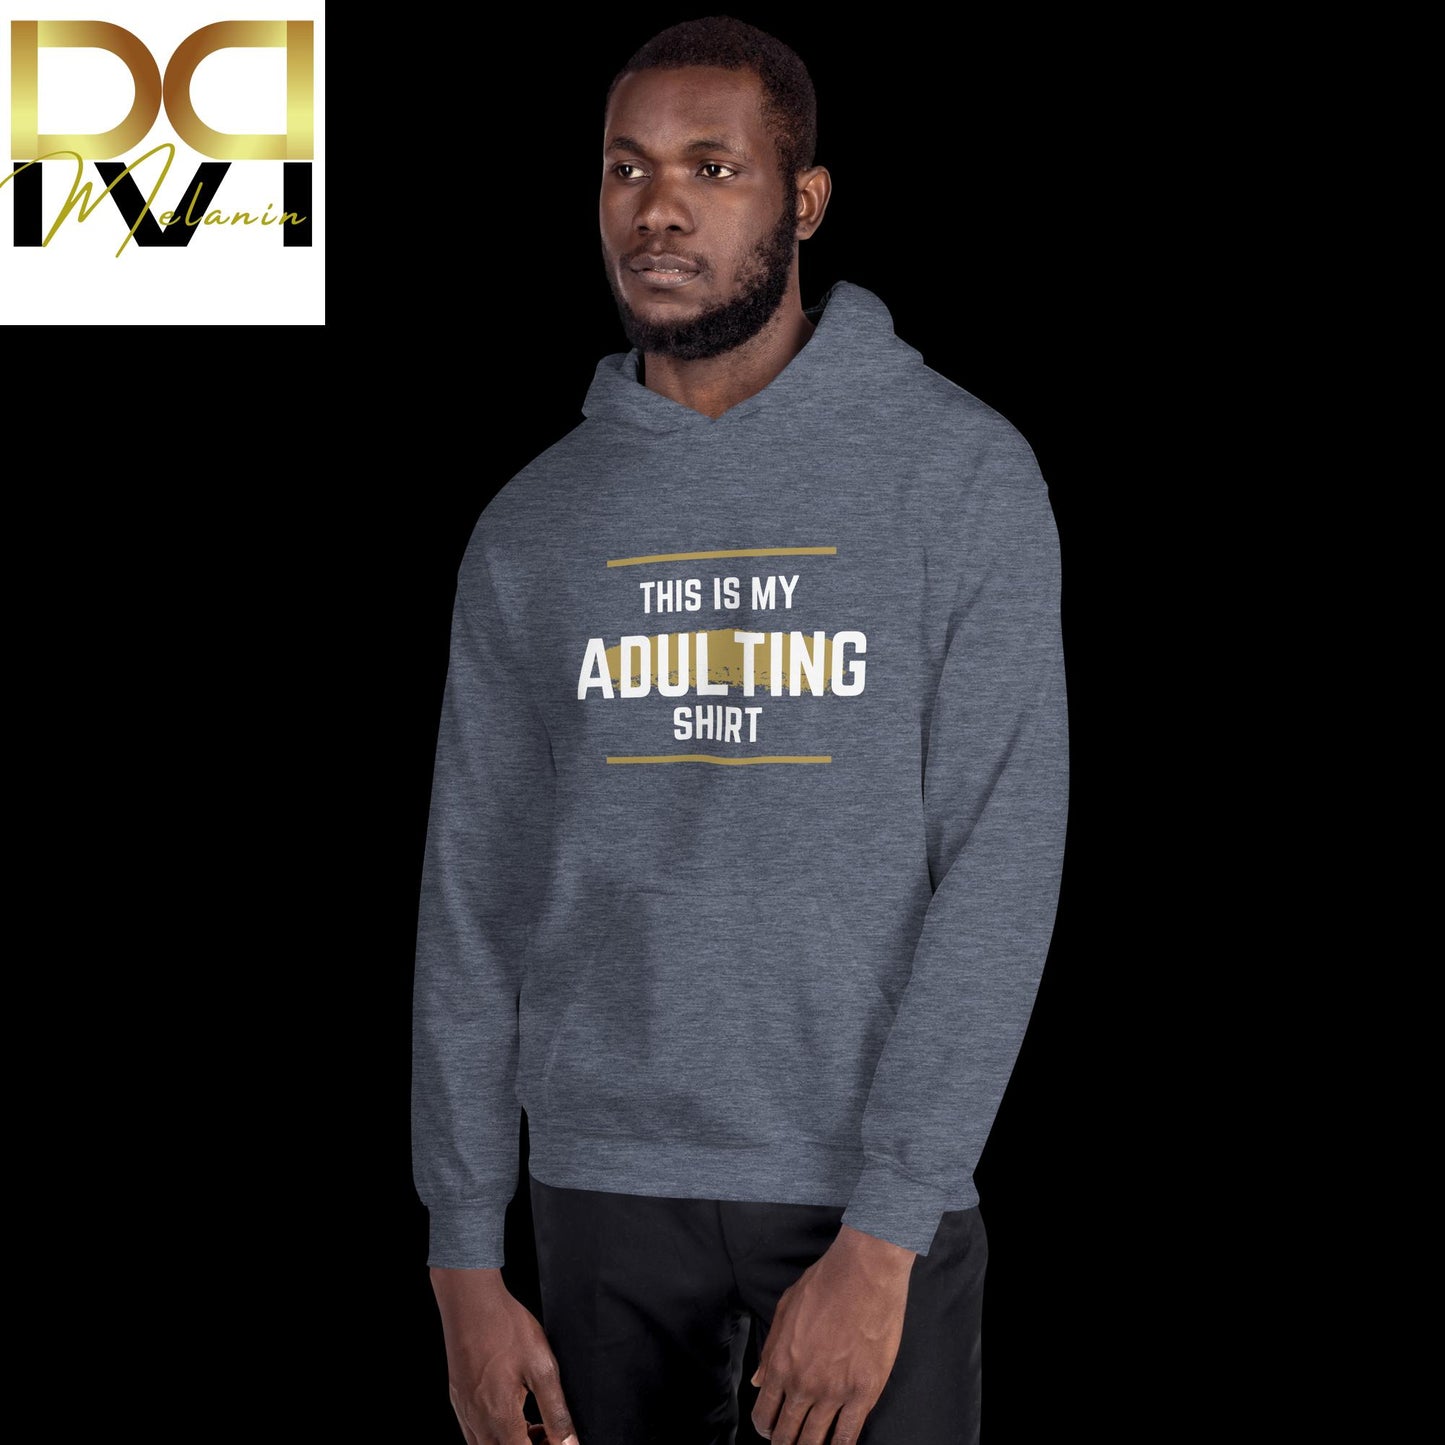 "This is My Adulting Shirt" Hoodie - Embrace Adulting with Style